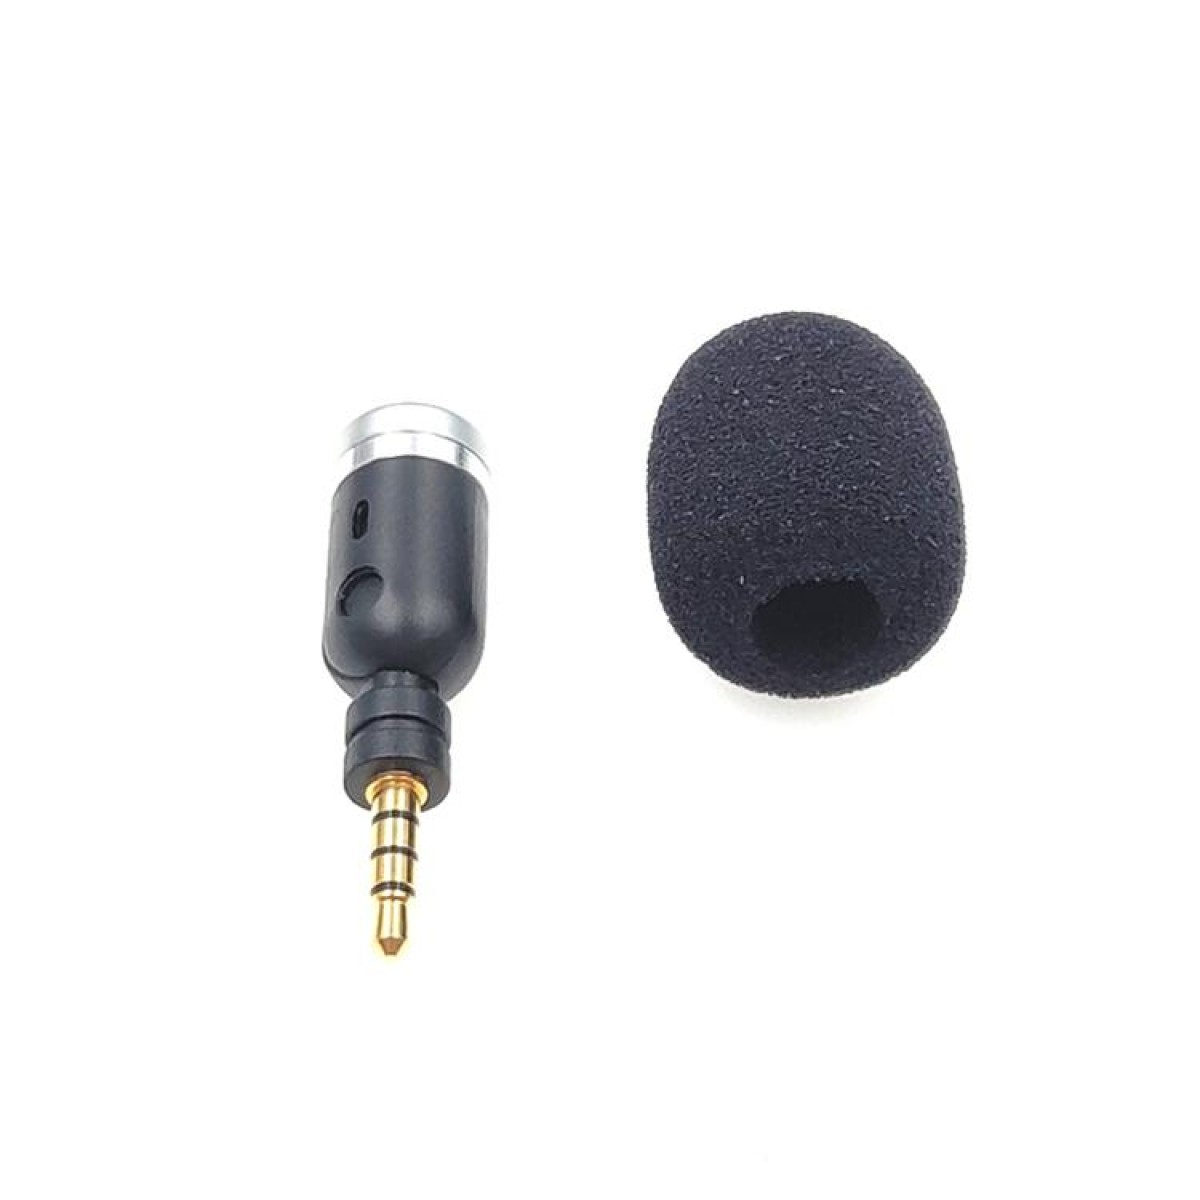 MK-5 4 Level Pin 3.5mm Gold Plated Plug Live Mobile Phone Tablet Laptop Mini Bend Microphone